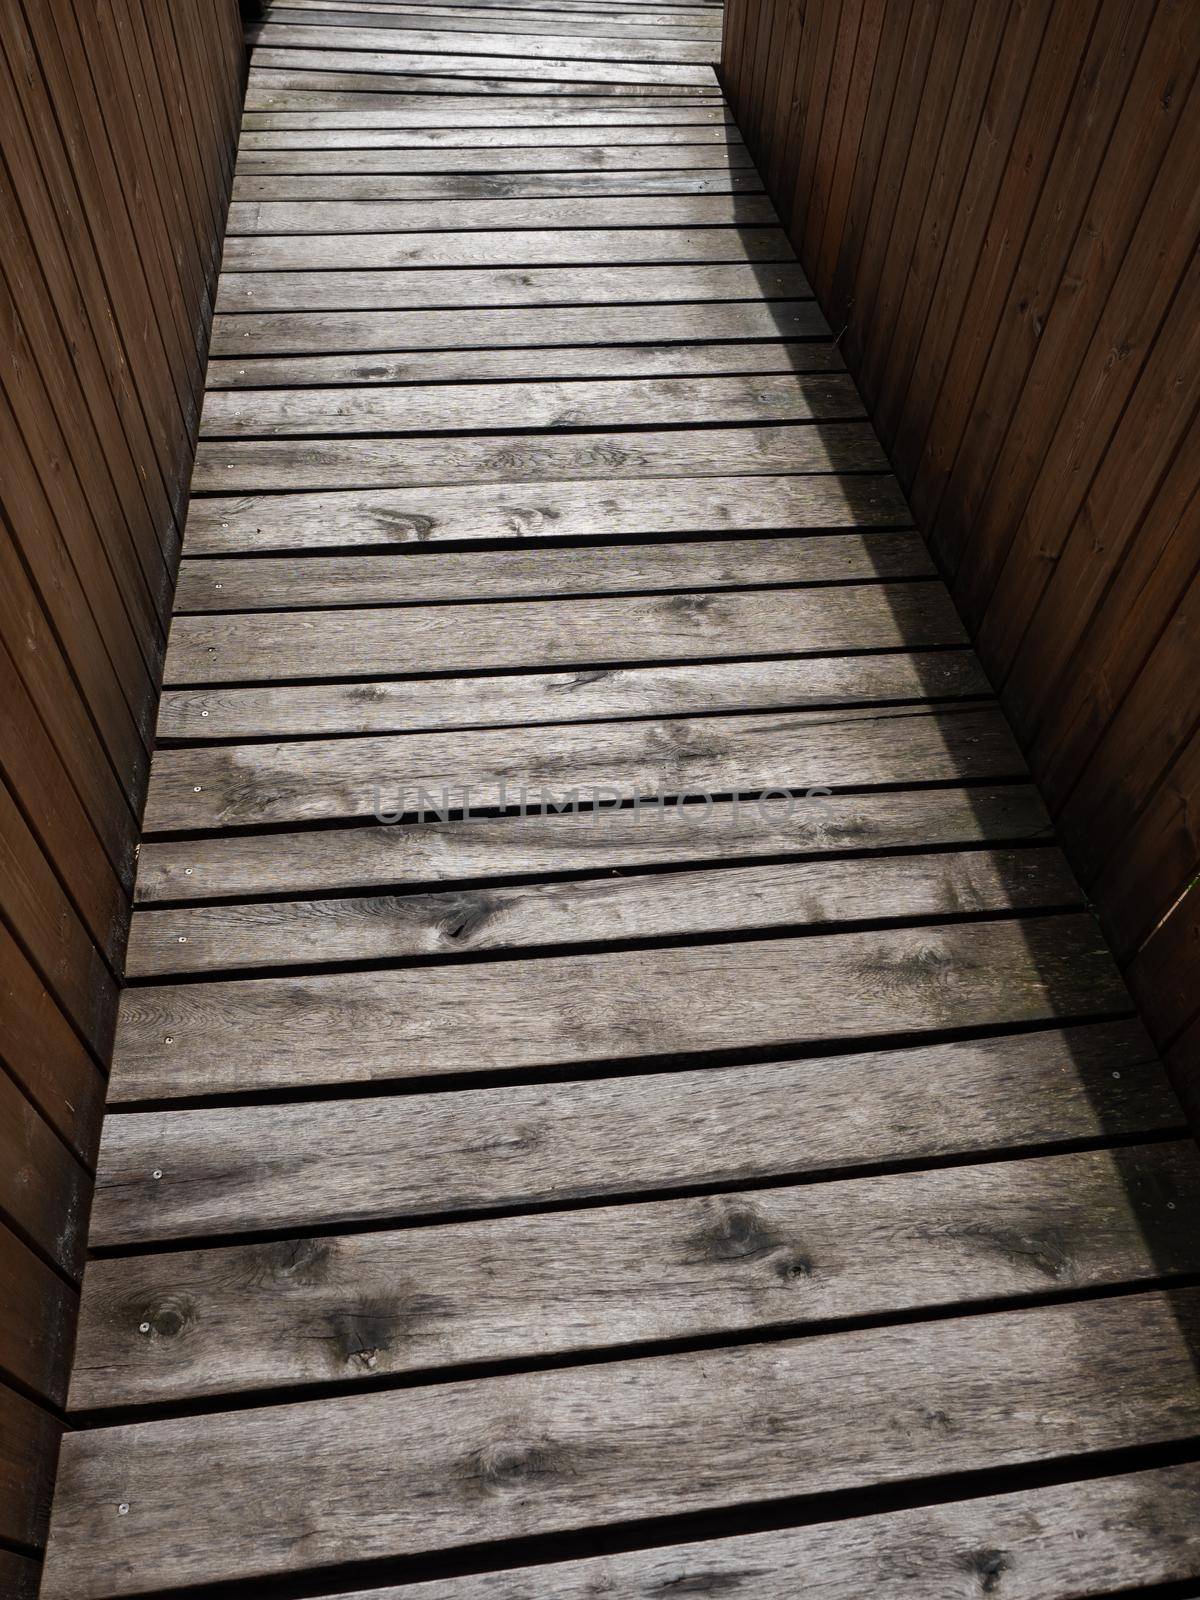 Wet wooden path for wheelchairs, another castle entrance. by rdonar2